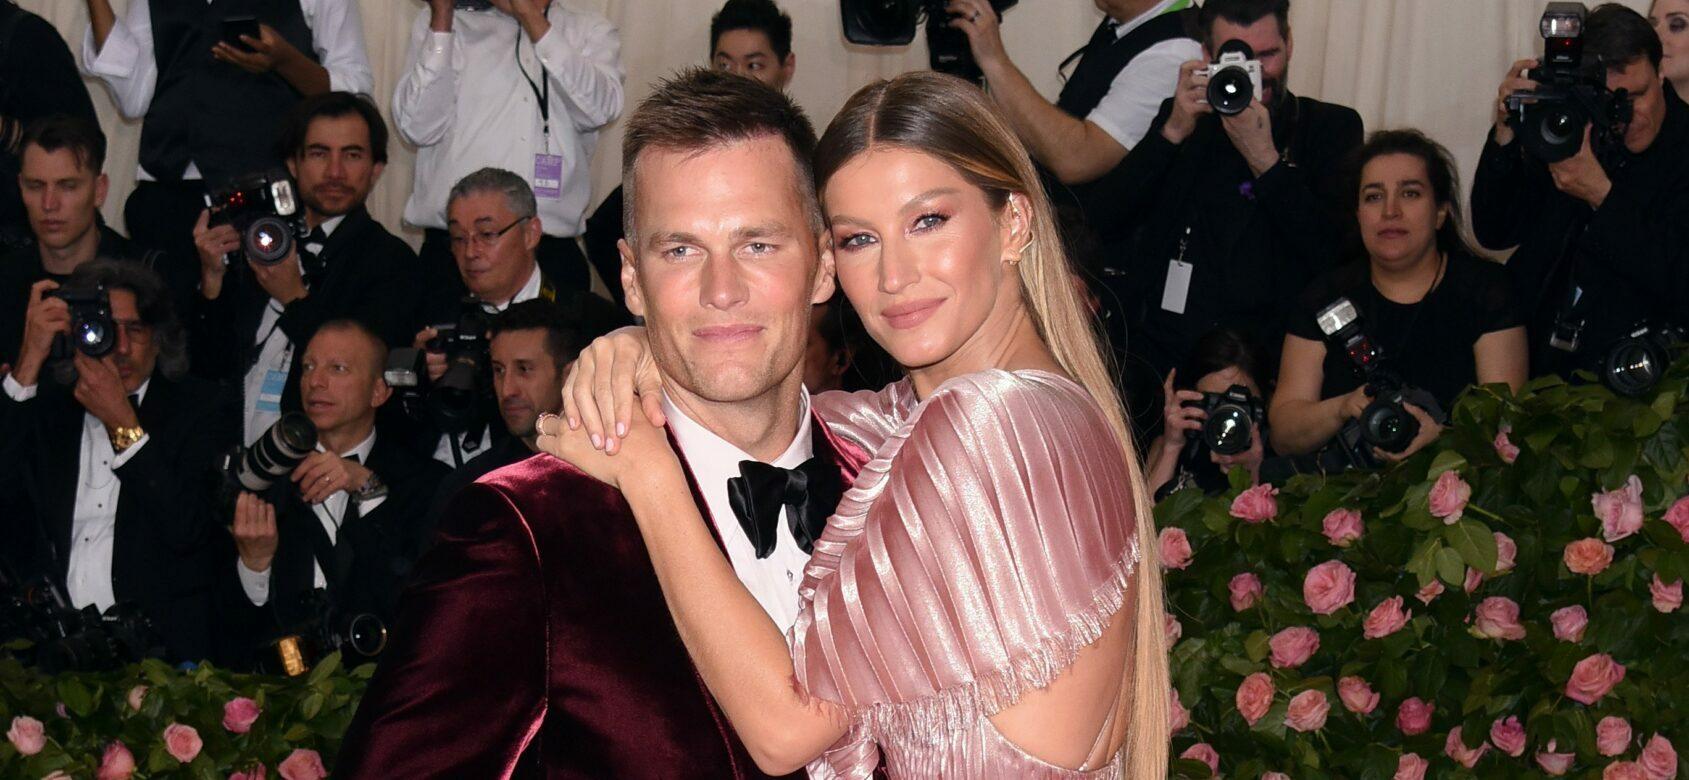 Tom Brady Marks Valentine’s Day By Sharing Cryptic Post About Love After Gisele Bündchen Divorce